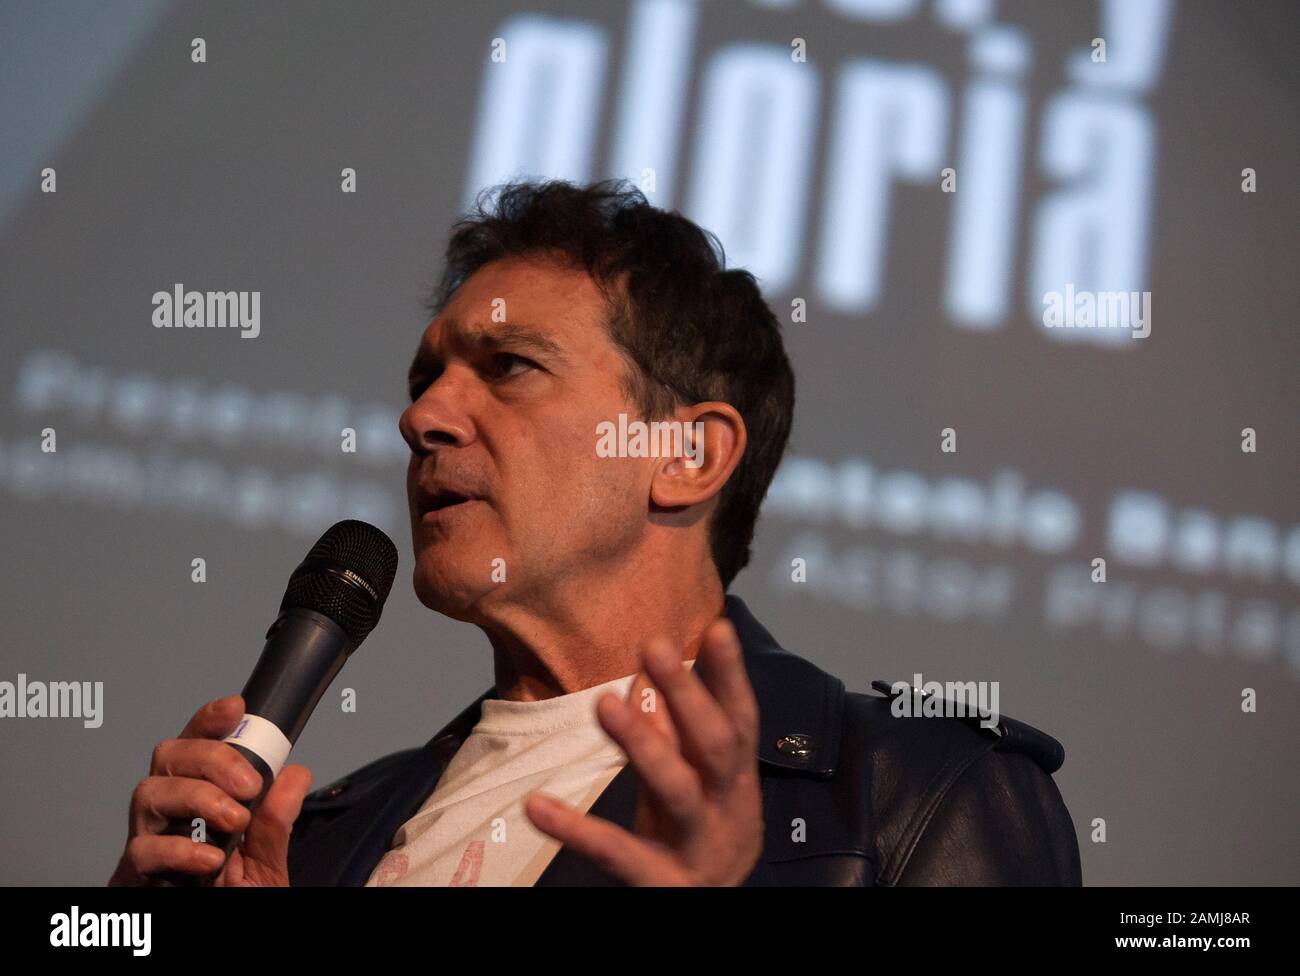 Spanish actor and director Antonio Banderas, who was nominated to receive the Spanish Goya Award and Academy Award of the best actor speaks during a promotional event to presents the screening of the film 'Dolor y Gloria' (Pain and Glory) directed by the Spanish director Pedro Almodovar at Albeniz Cinema, as part of activities of the Spanish Film Academy's Goya Awards ceremony. The Malaga city welcomes to Goya Awards Ceremony (which is celebrated on 25 January) with photographic exhibitions and previous screenings of films nominated to receive the Goya Award of the best film. Stock Photo